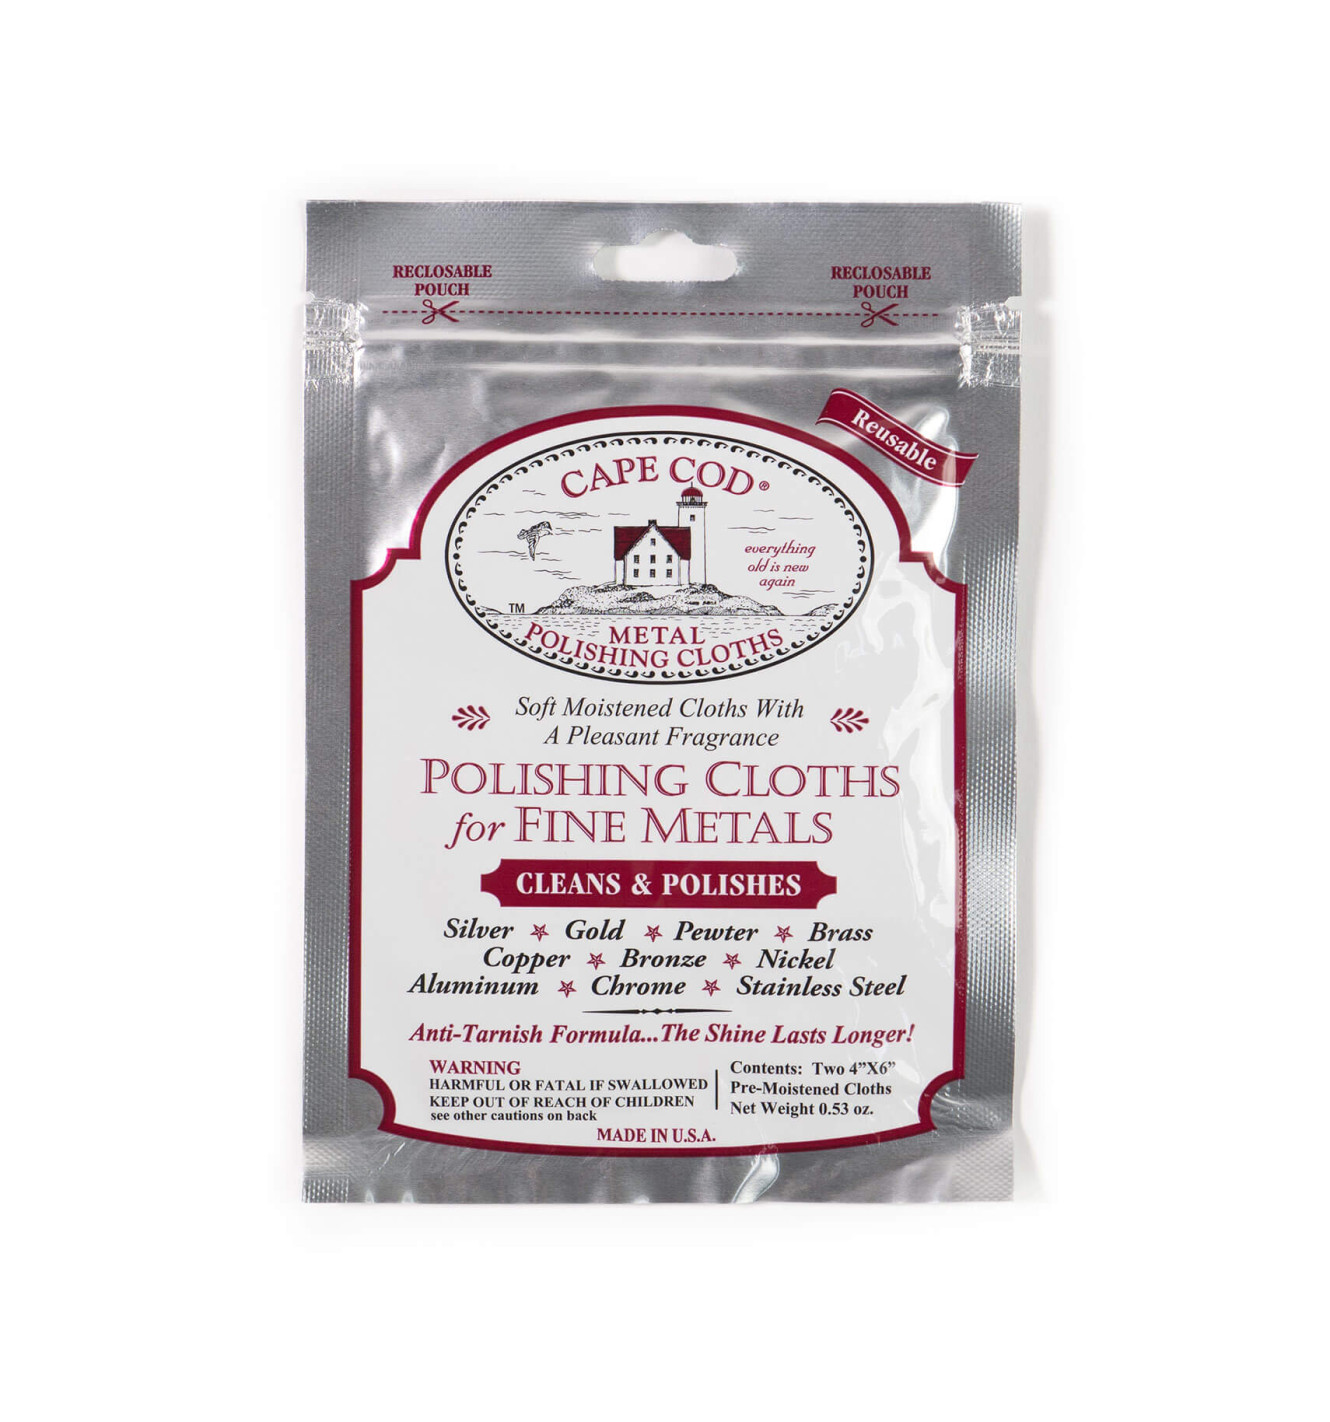 CapeCod Polishing Cloths for Fine Metals – Pack of 2 –